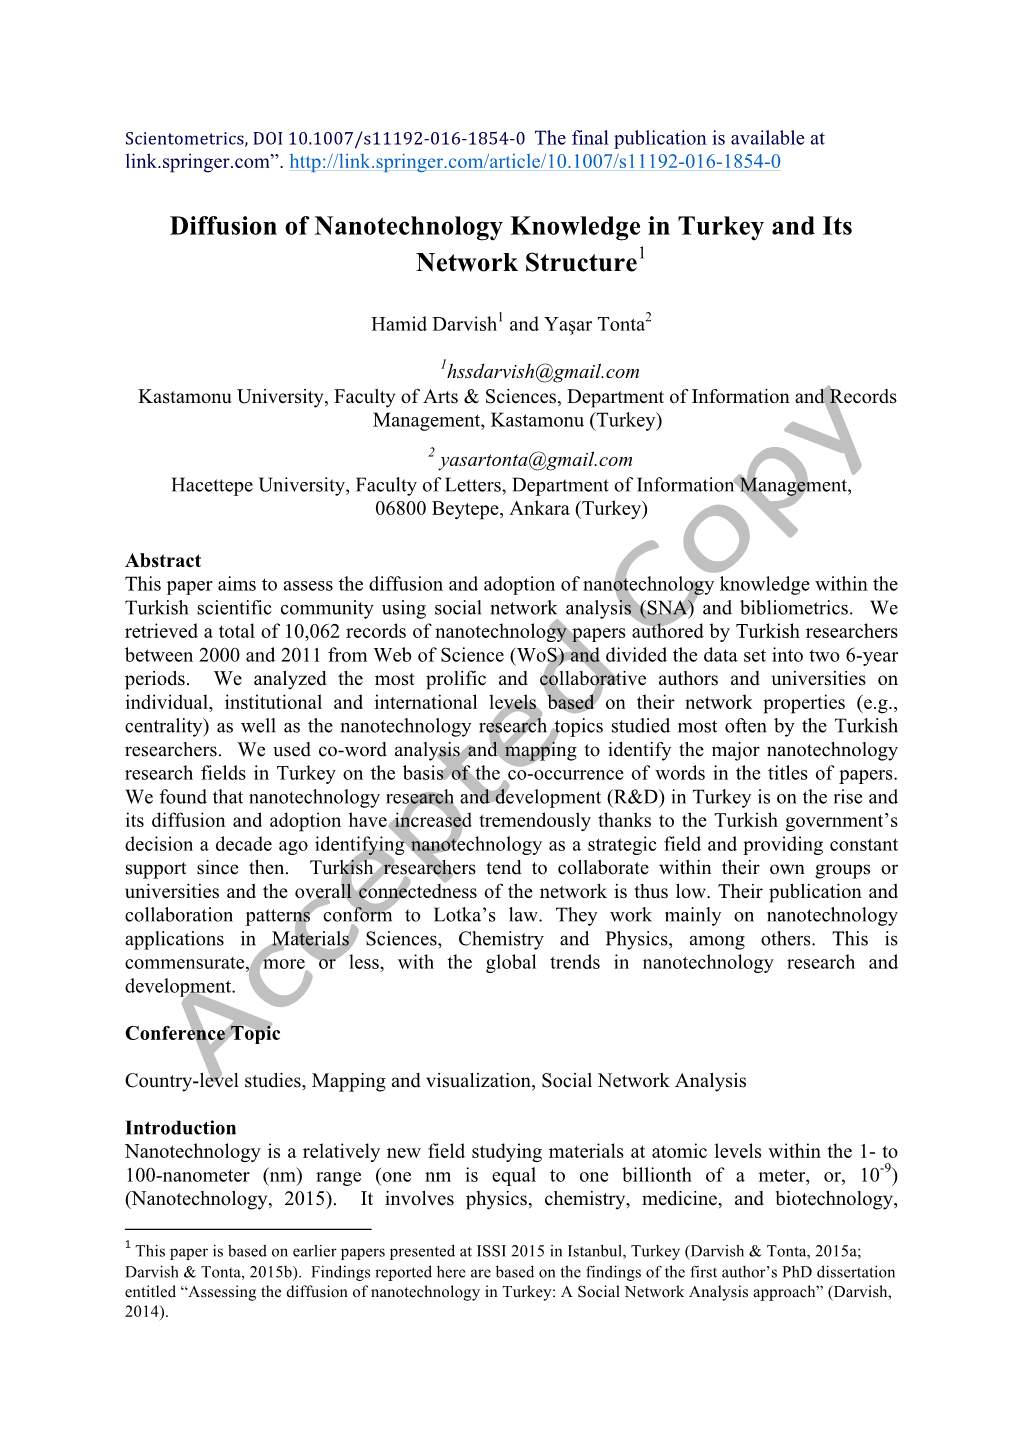 Diffusion of Nanotechnology Knowledge in Turkey and Its Network Structure1